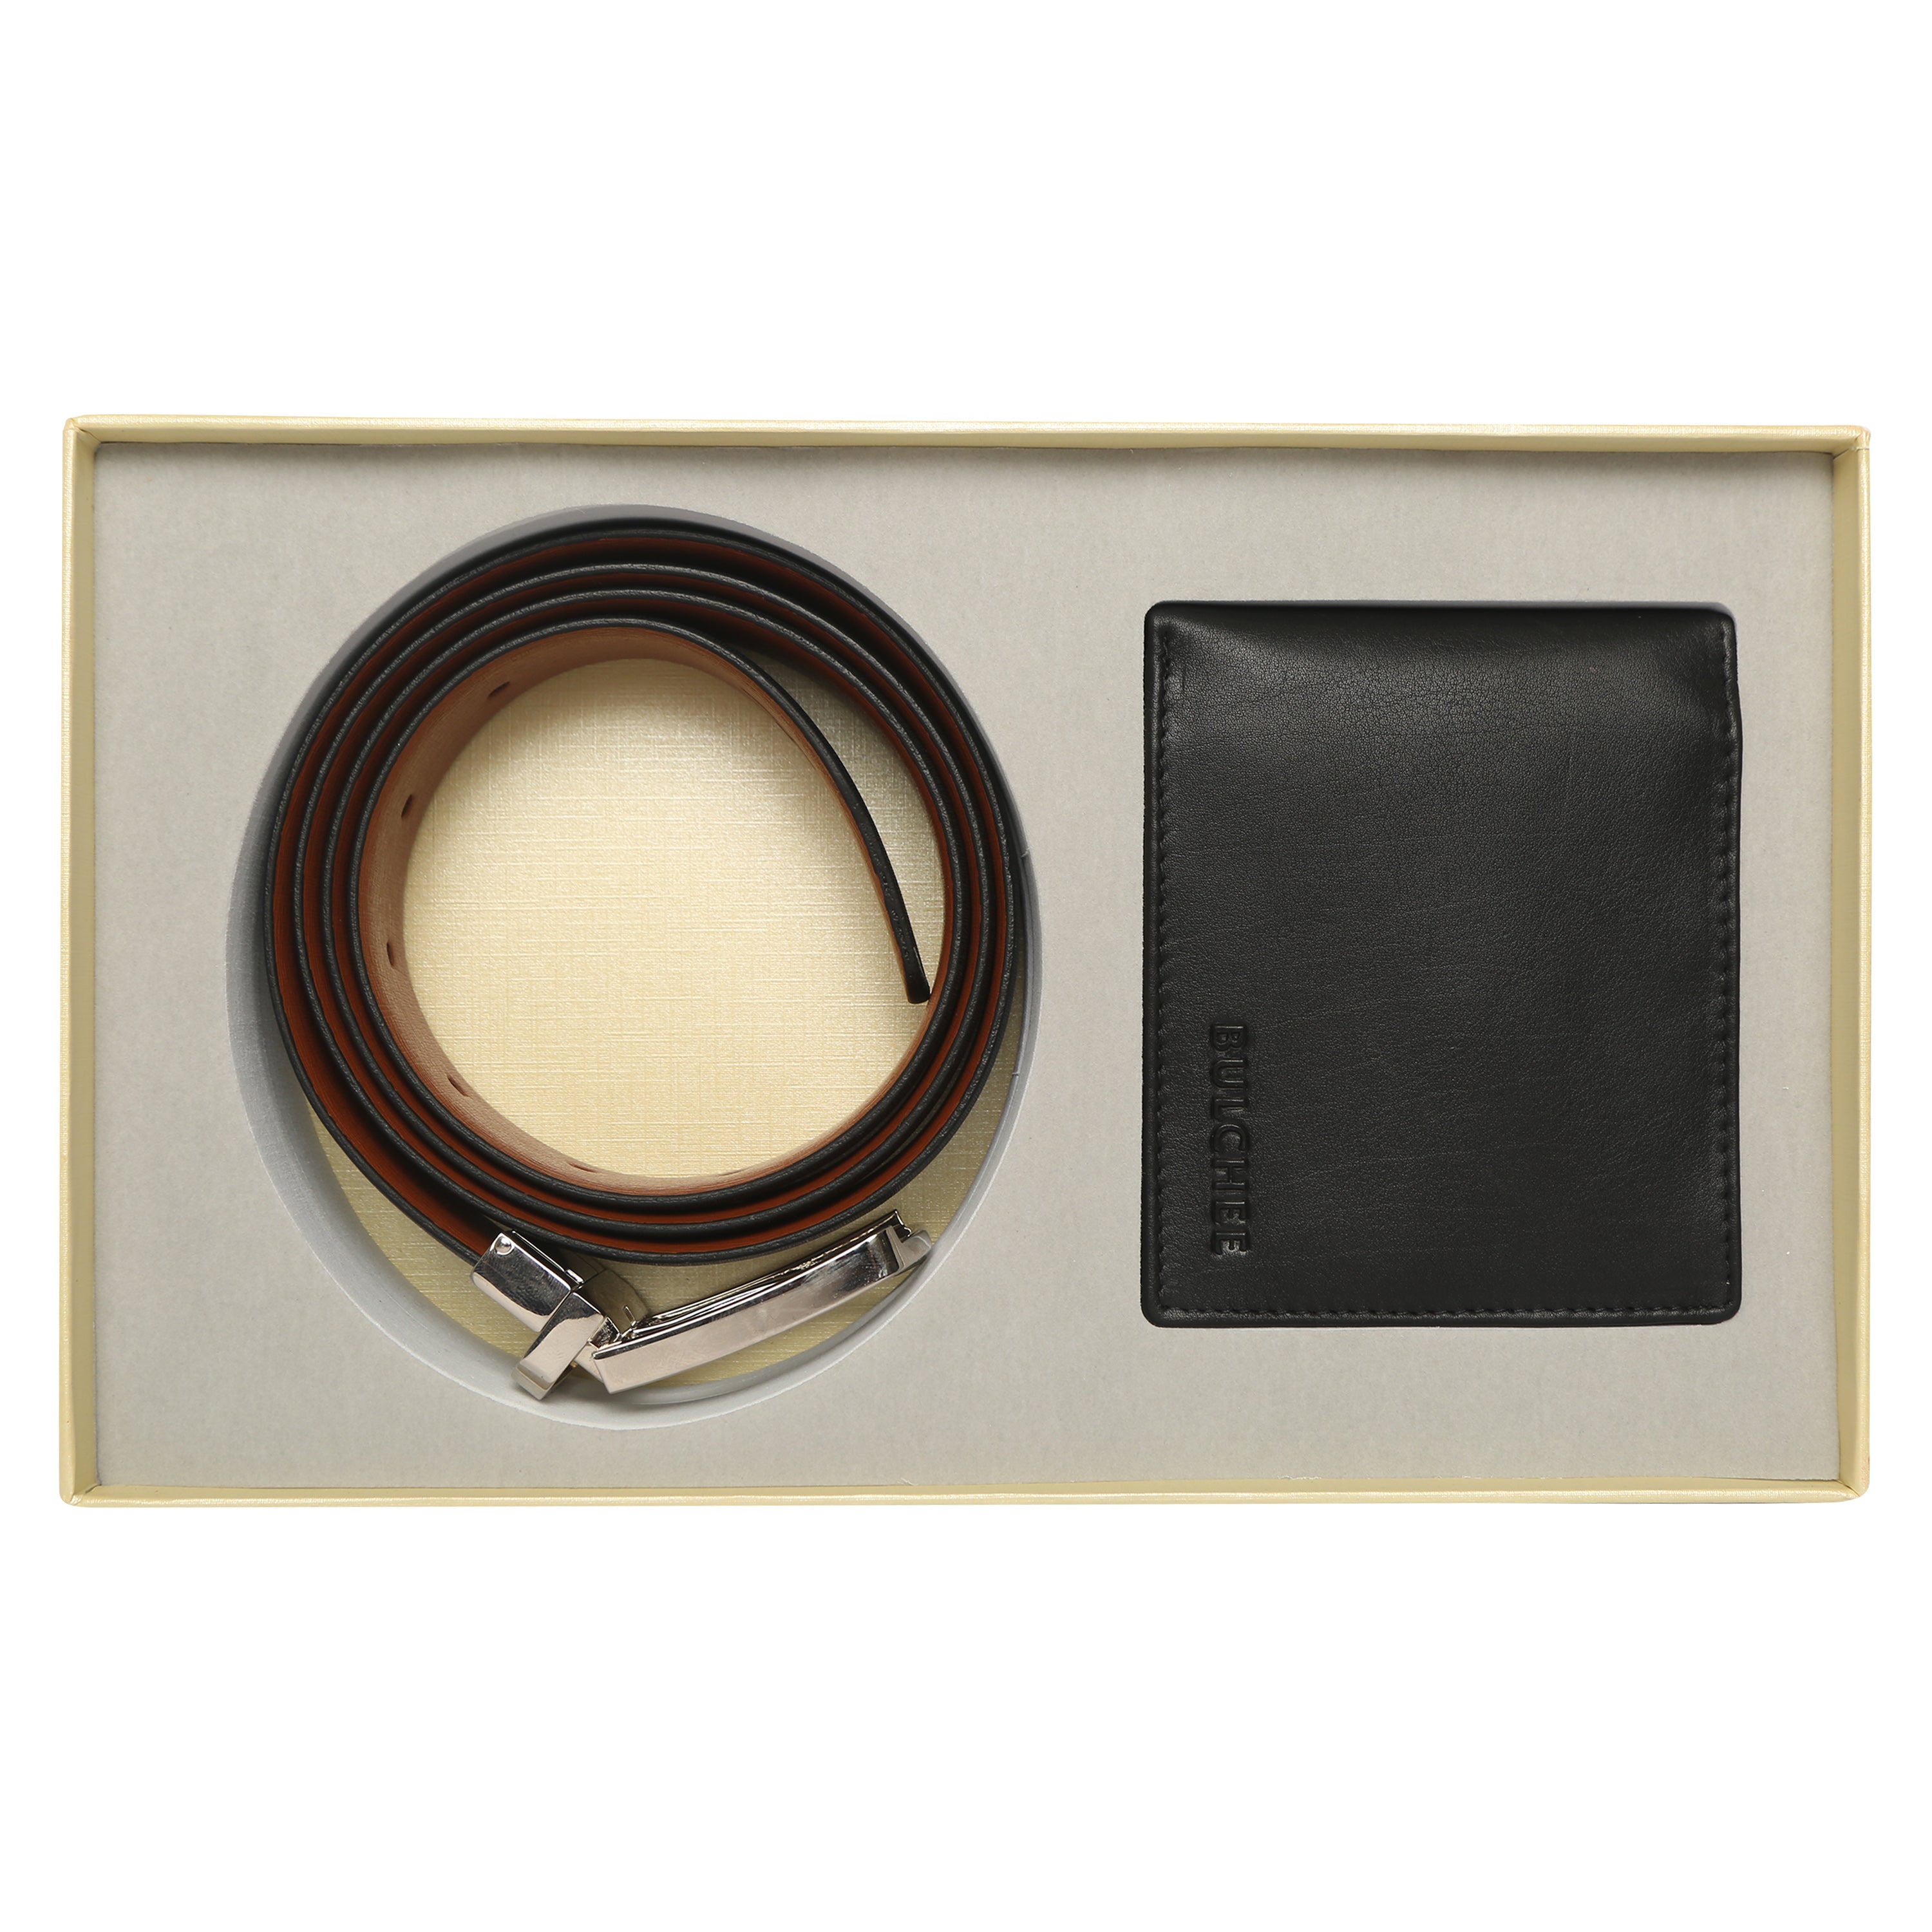 Bulchee Gift Box Leather Belt and Wallet